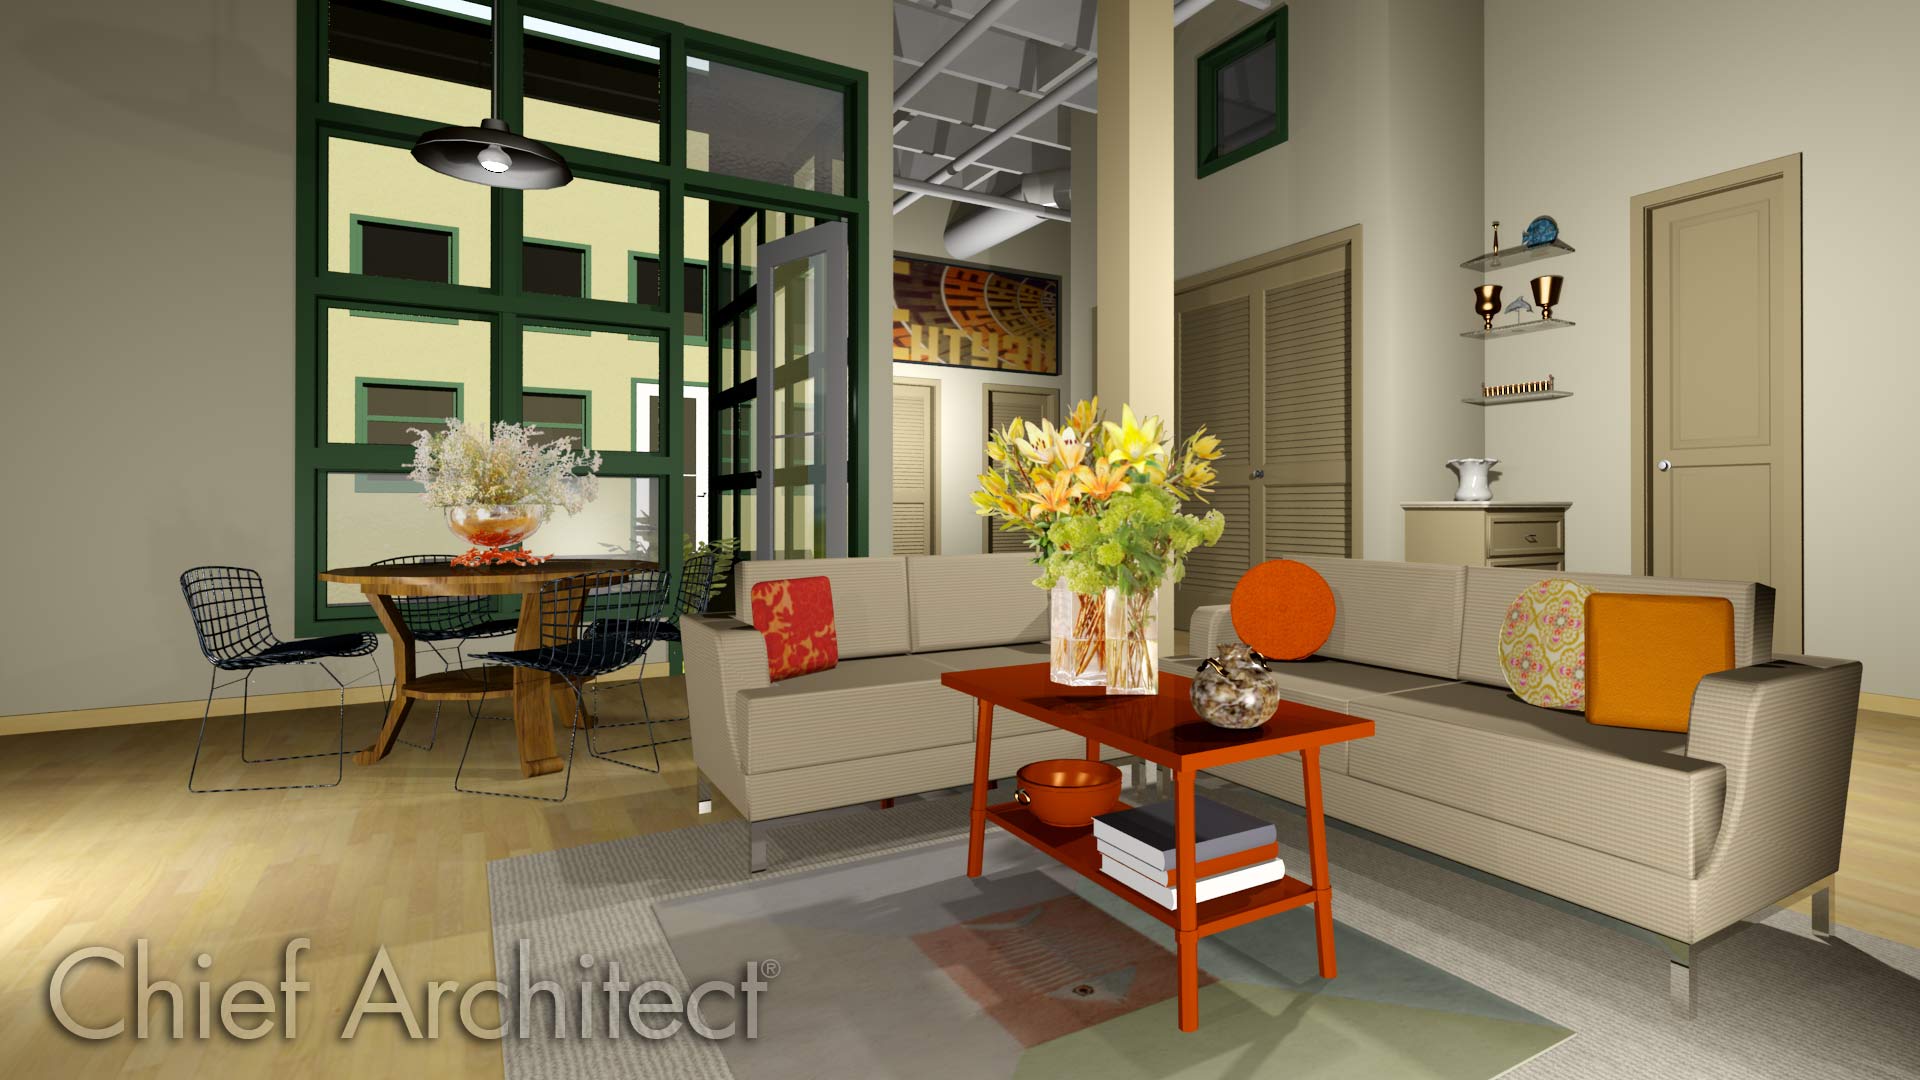 chief architect interiors layout templates download